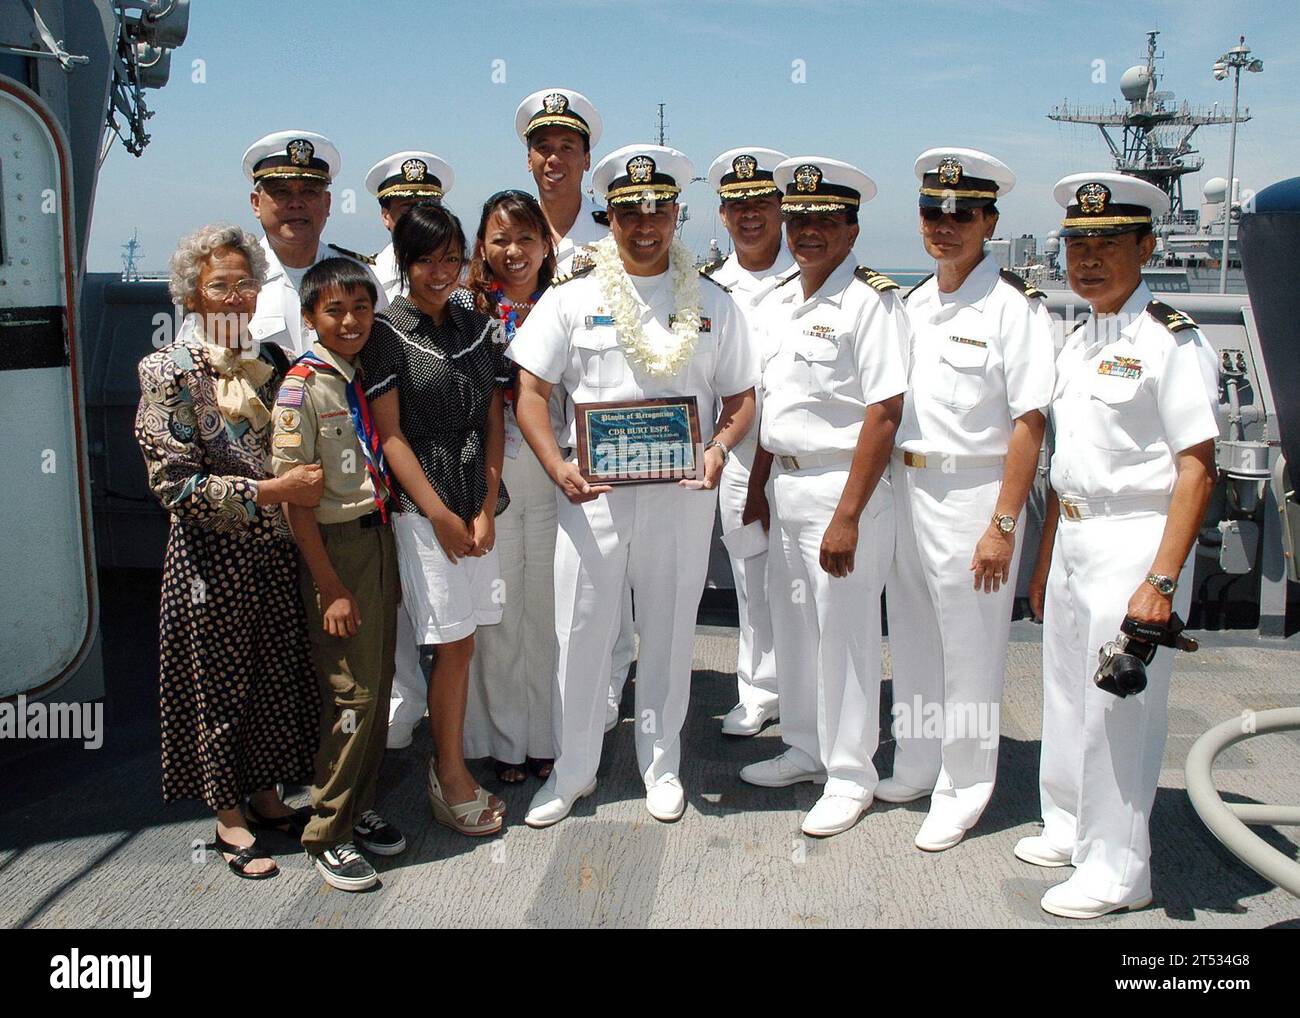 0705313970R-076 SAN DIEGO (May 31, 2007) Р Dock landing ship USS Comstock (LSD 45) Commanding Officer, Cmdr. Burt L. Espe and his family receive an outstanding achievement award by retired Cmdr. Gil Gonzales, president of the Filipino American Military Officer Association. Espe earned the award for his reconstruction efforts with the Philippine Armed Forces. Comstock returned home from a near nine-month deployment in support of the global war on terrorism. U.S. Navy Stock Photo